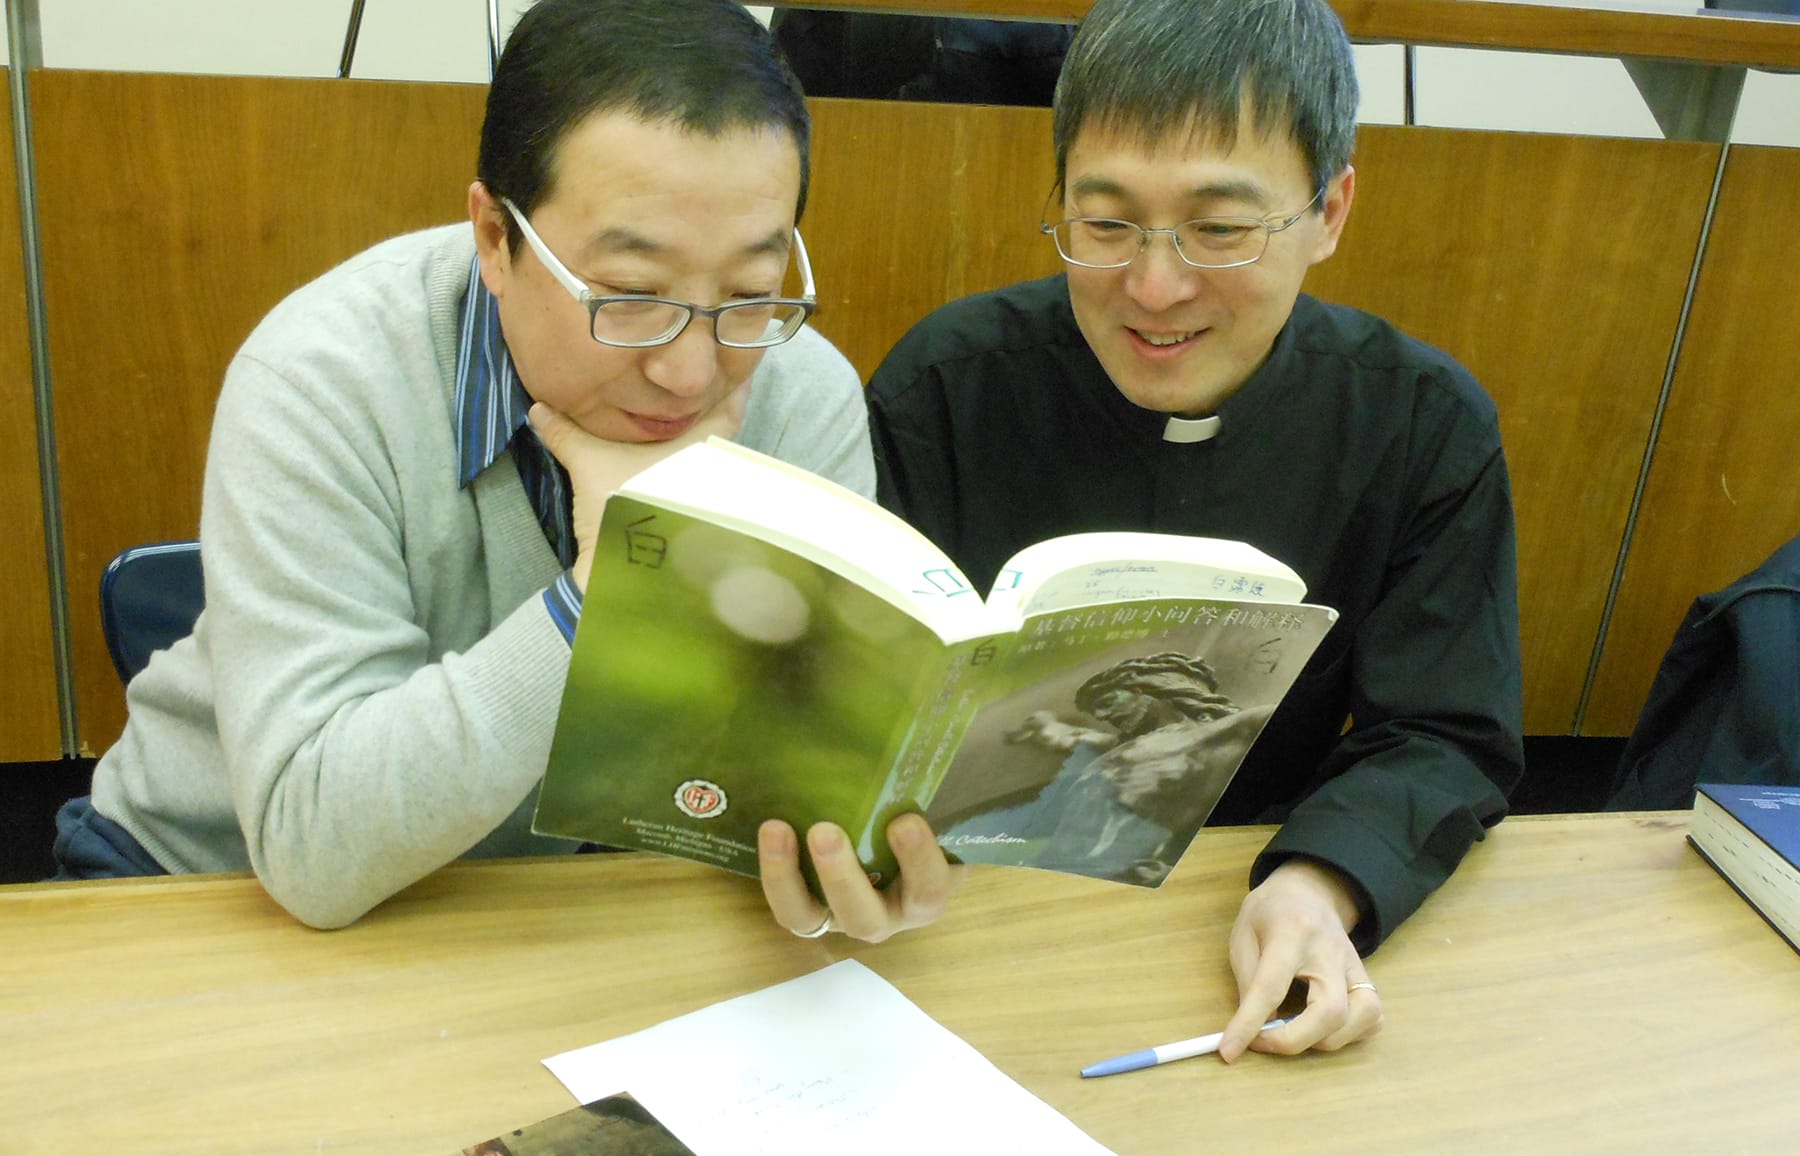 Chinese Man And Pastor Reading Luther's Small Catechism